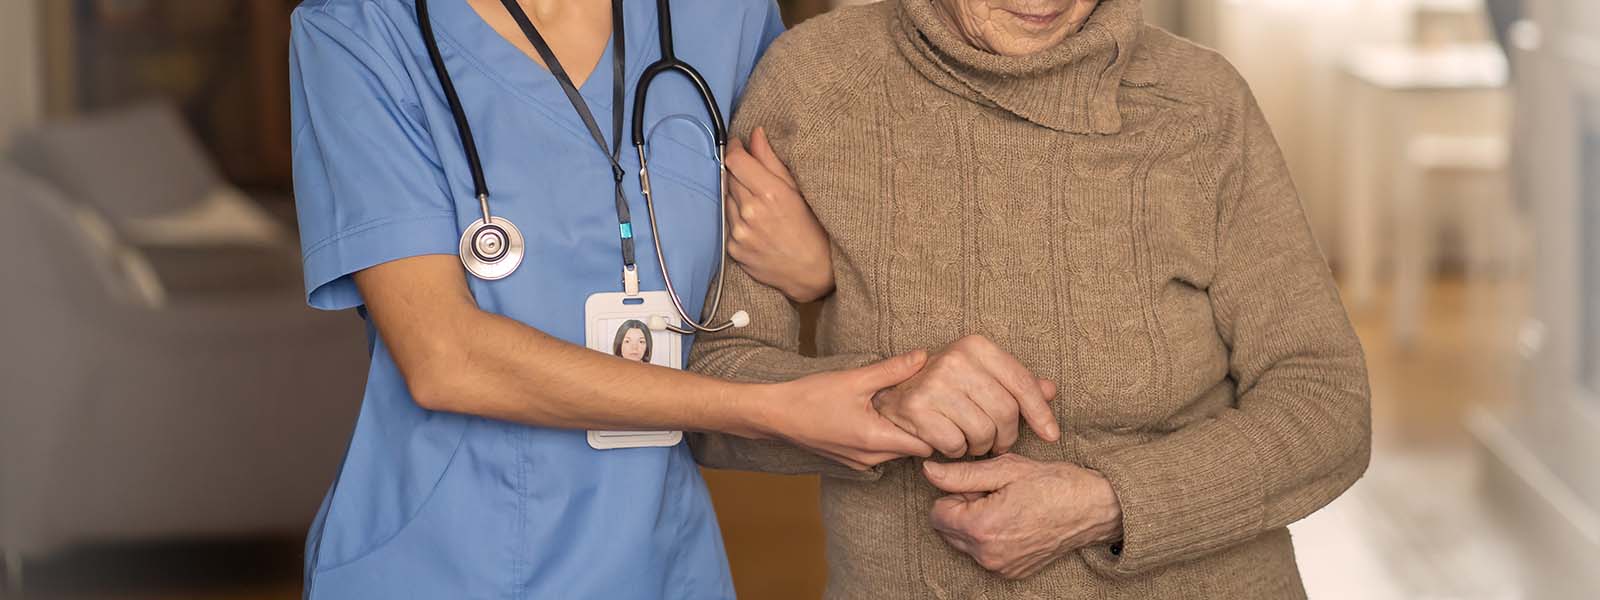 A young nurse shows care and professionalism in relation to an elderly woman